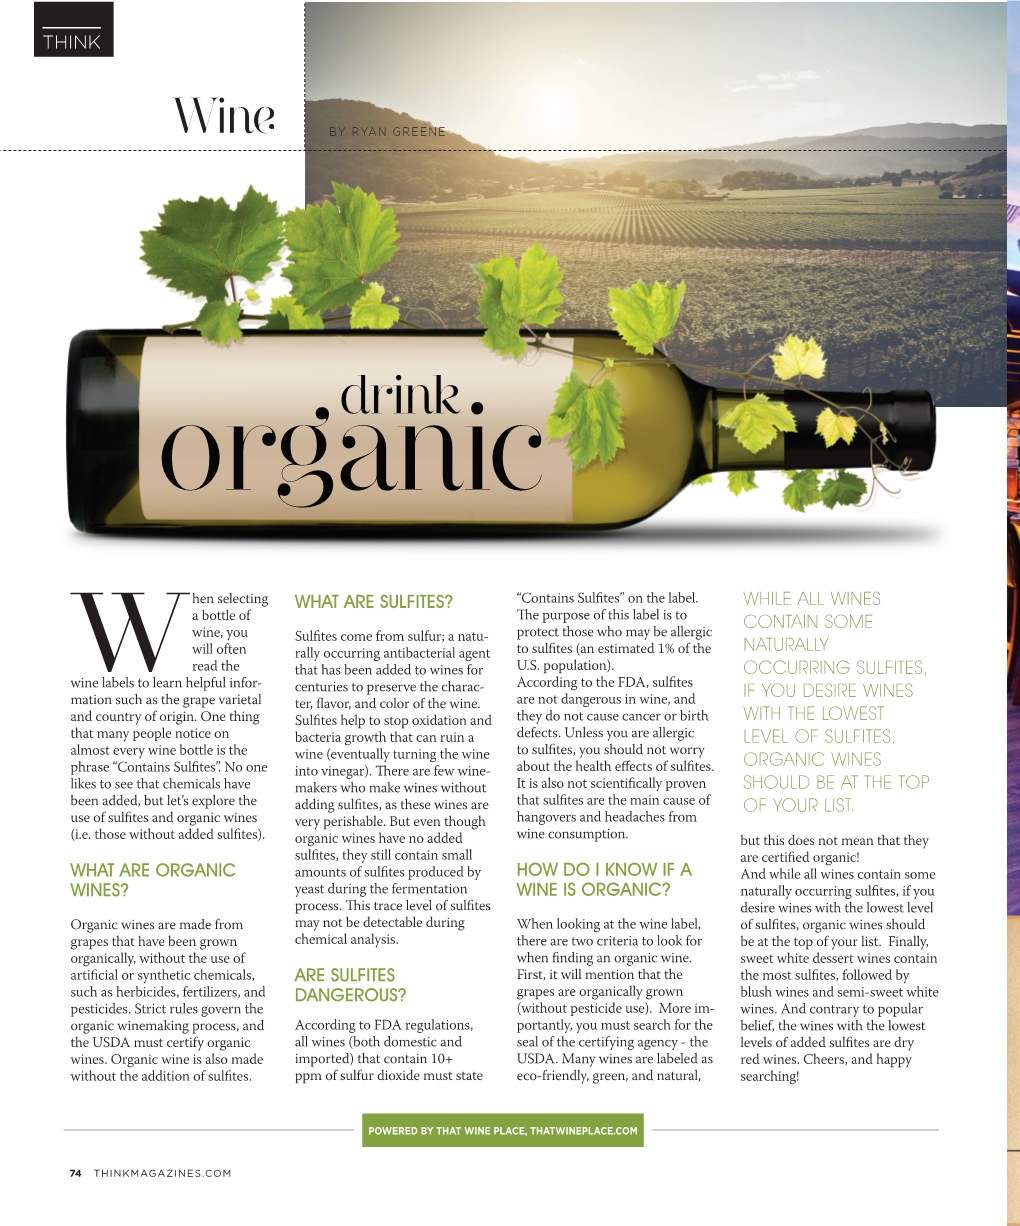 What Are Organic Wines?